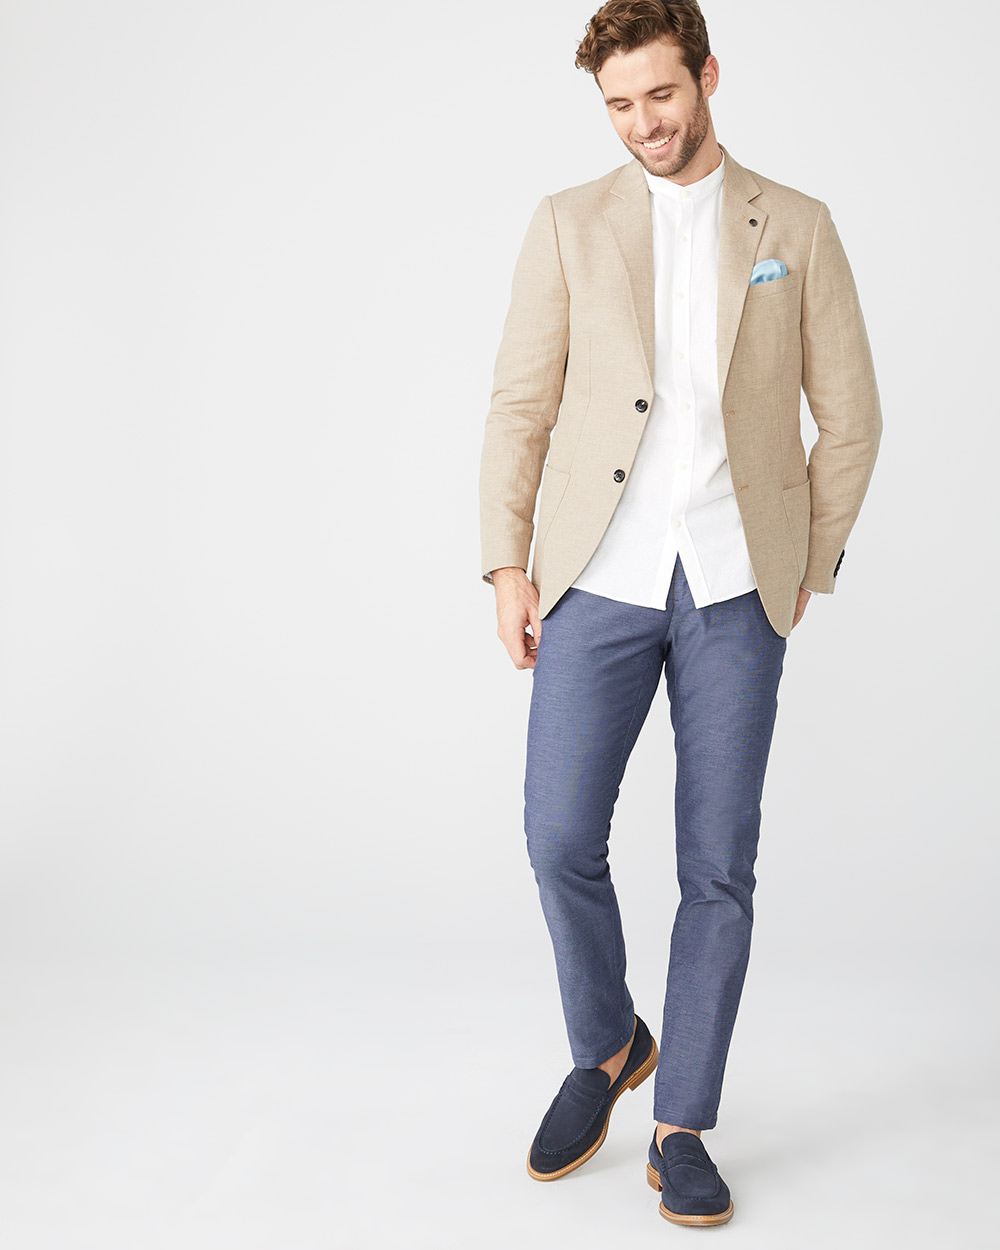 Tailored Fit white linen-blend Shirt with Mandarin collar | RW&CO.